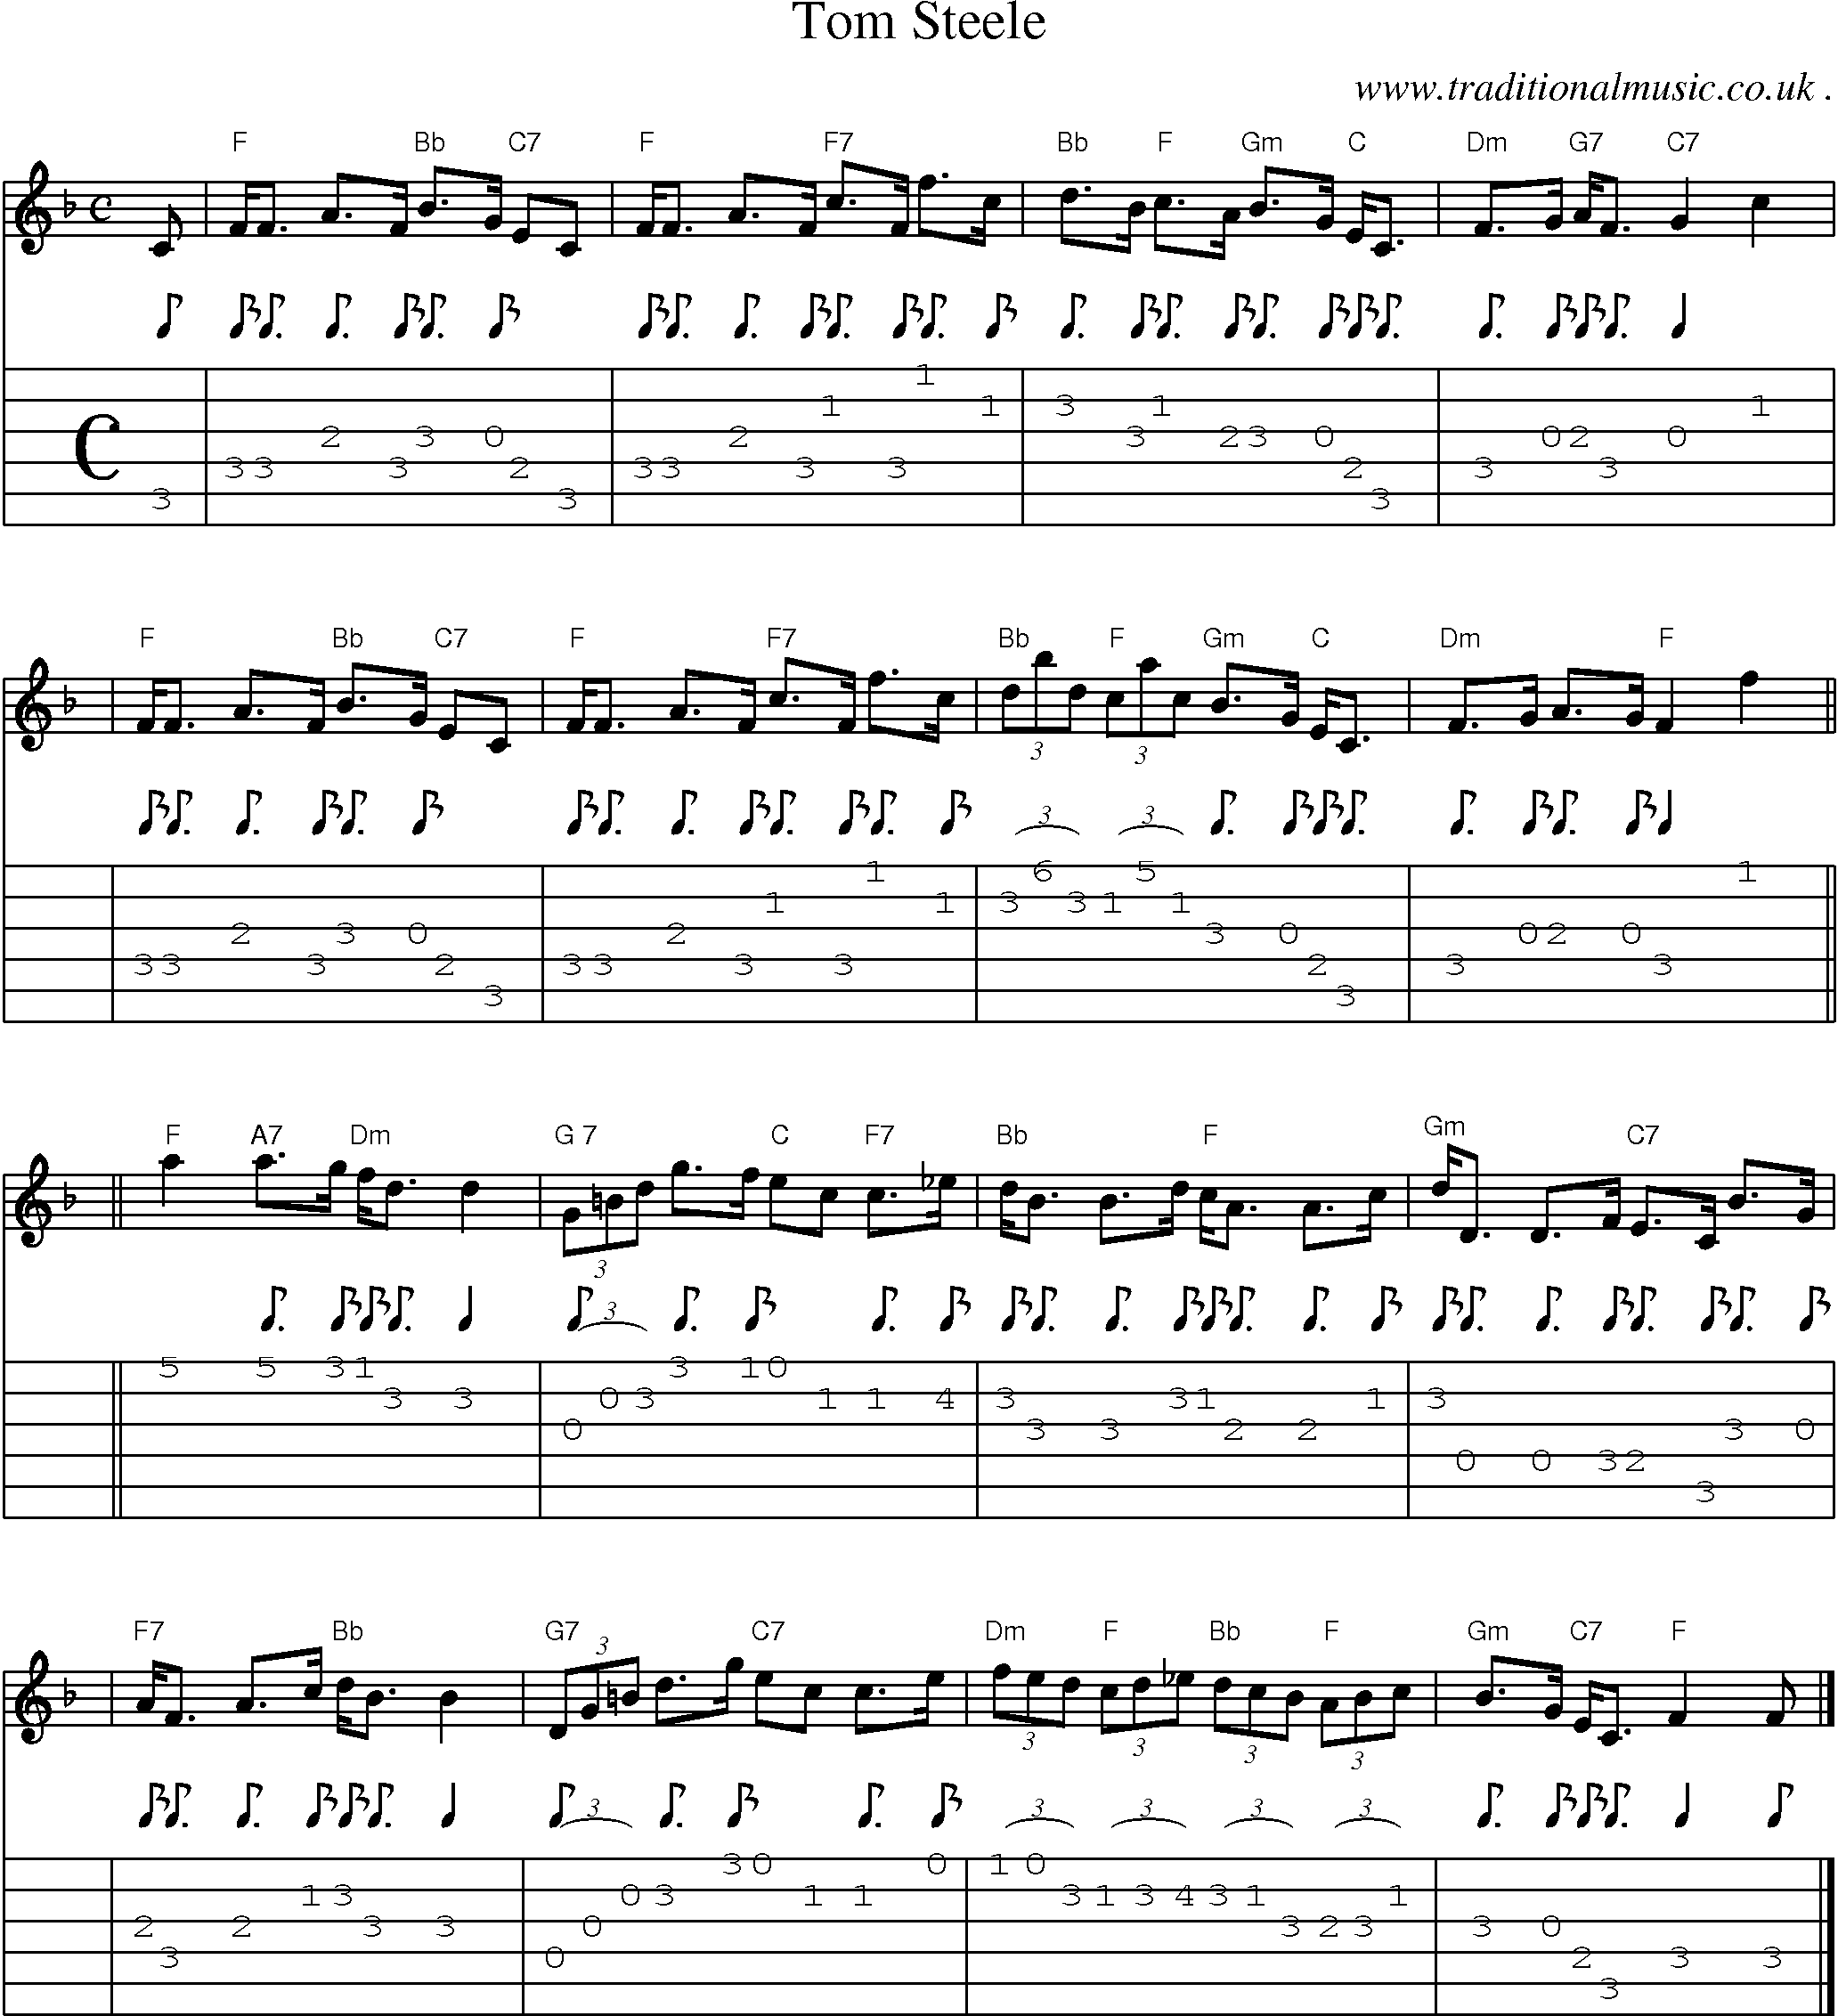 Sheet-music  score, Chords and Guitar Tabs for Tom Steele